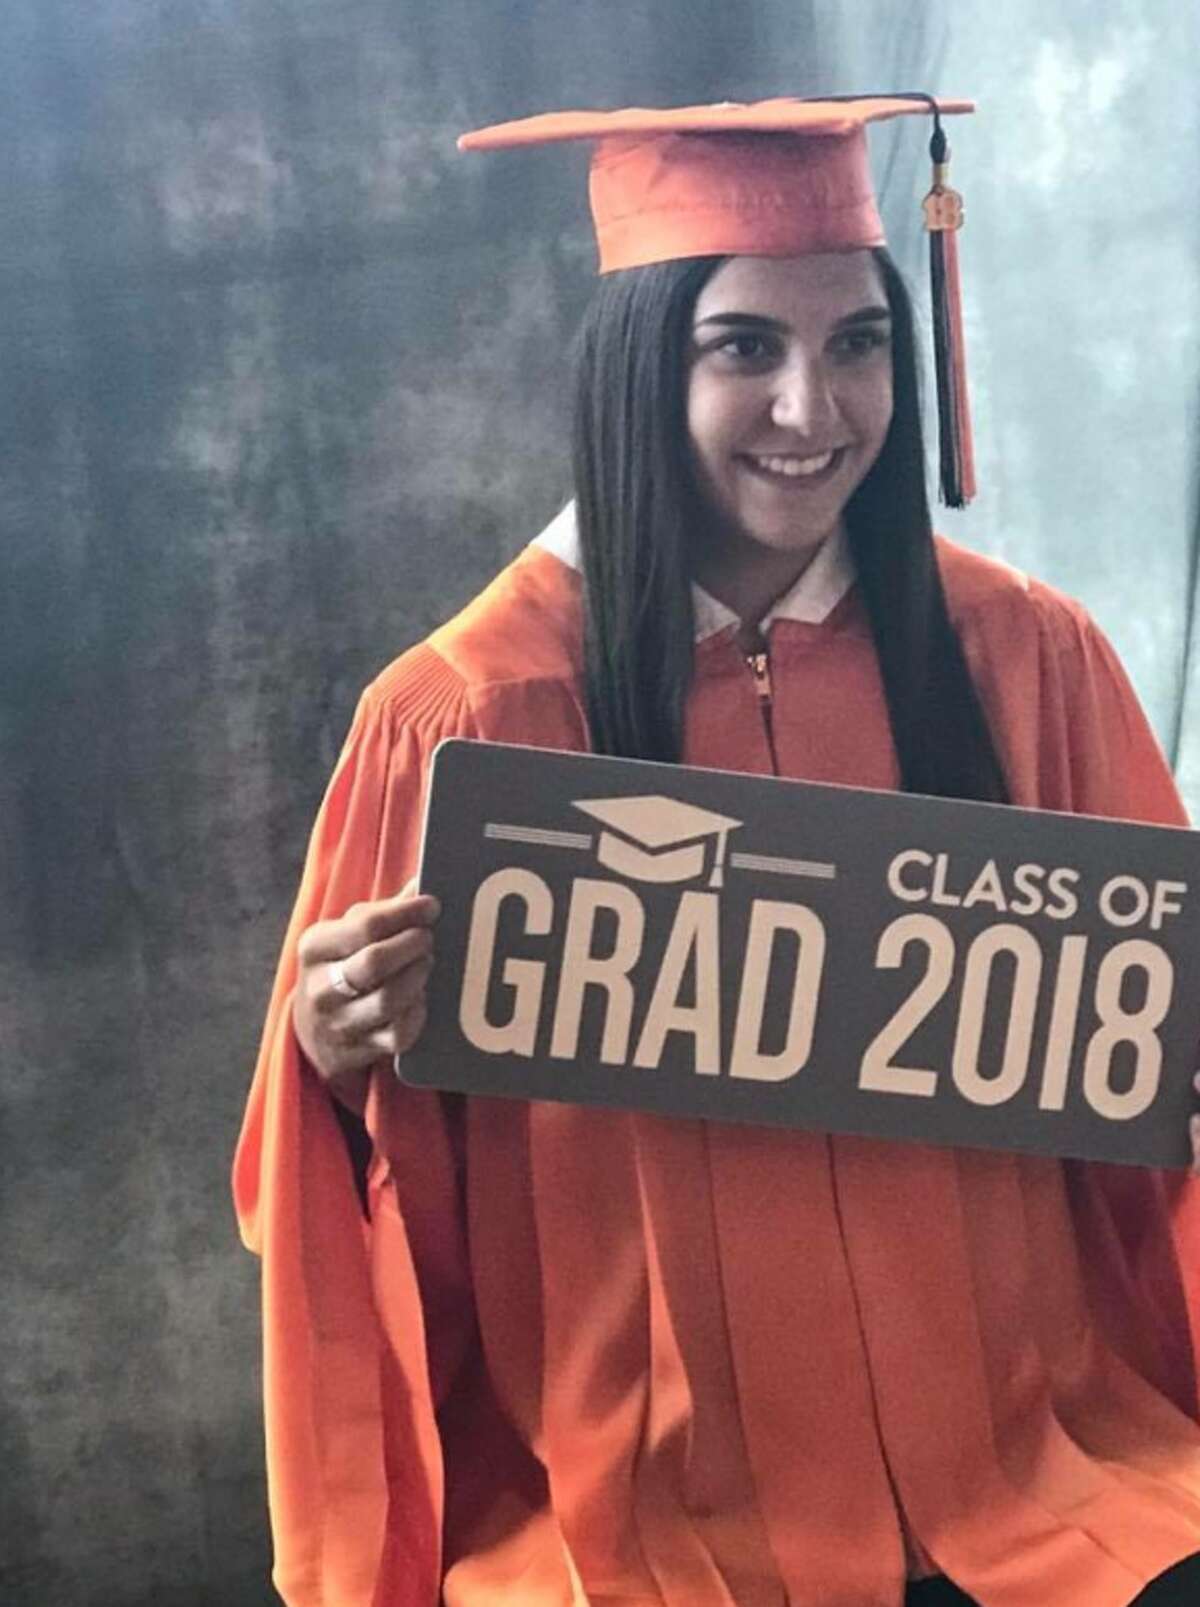 Kaitlin Leonor Castilleja, 18, was fatally stabbed early Friday on the Northeast Side. She graduated from James Madison High School in 2018.